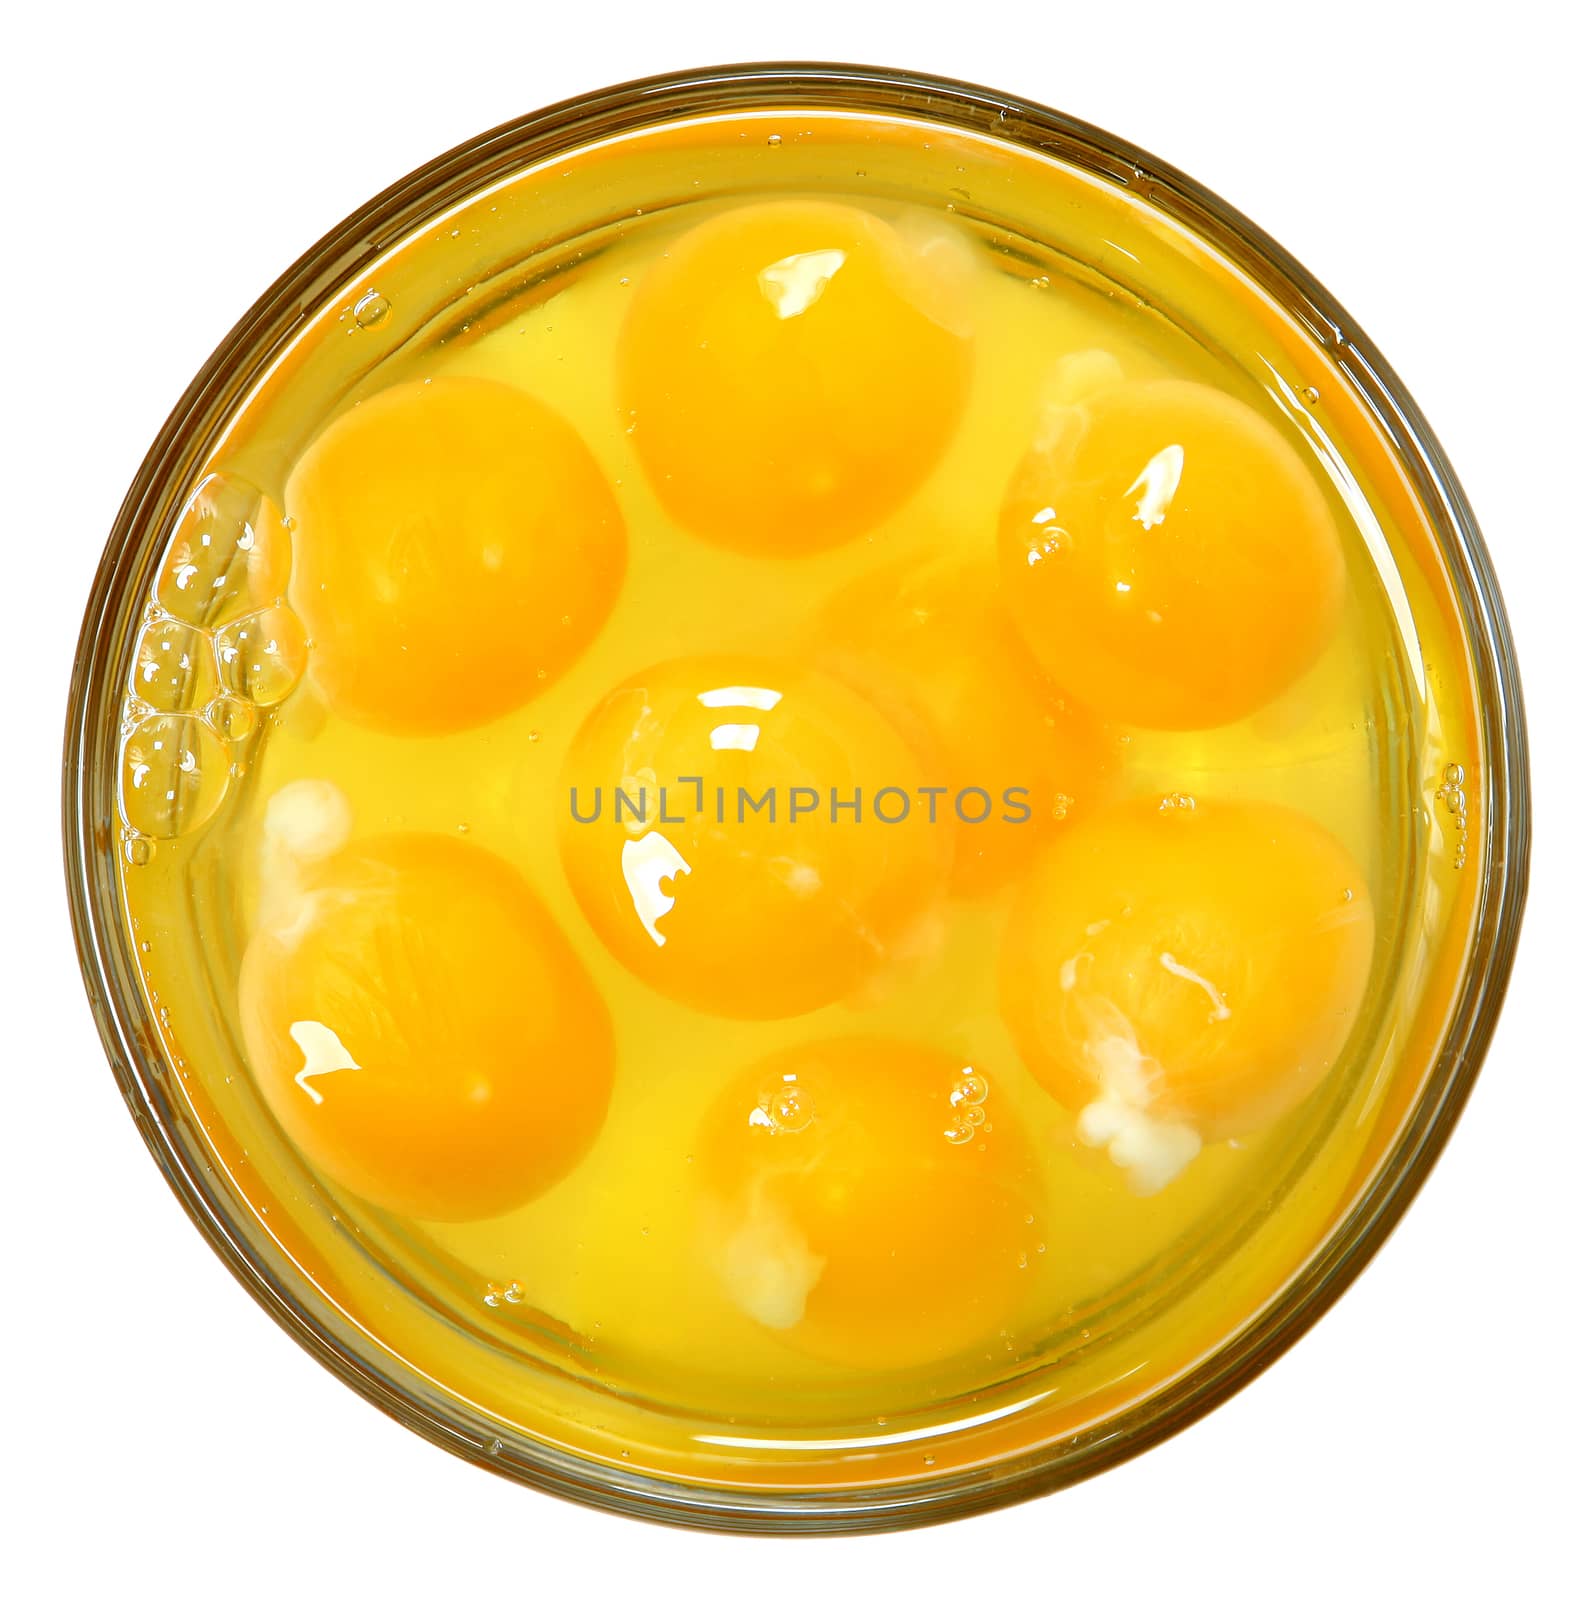 Raw Eggs in Glass Bowl Isolated Over White